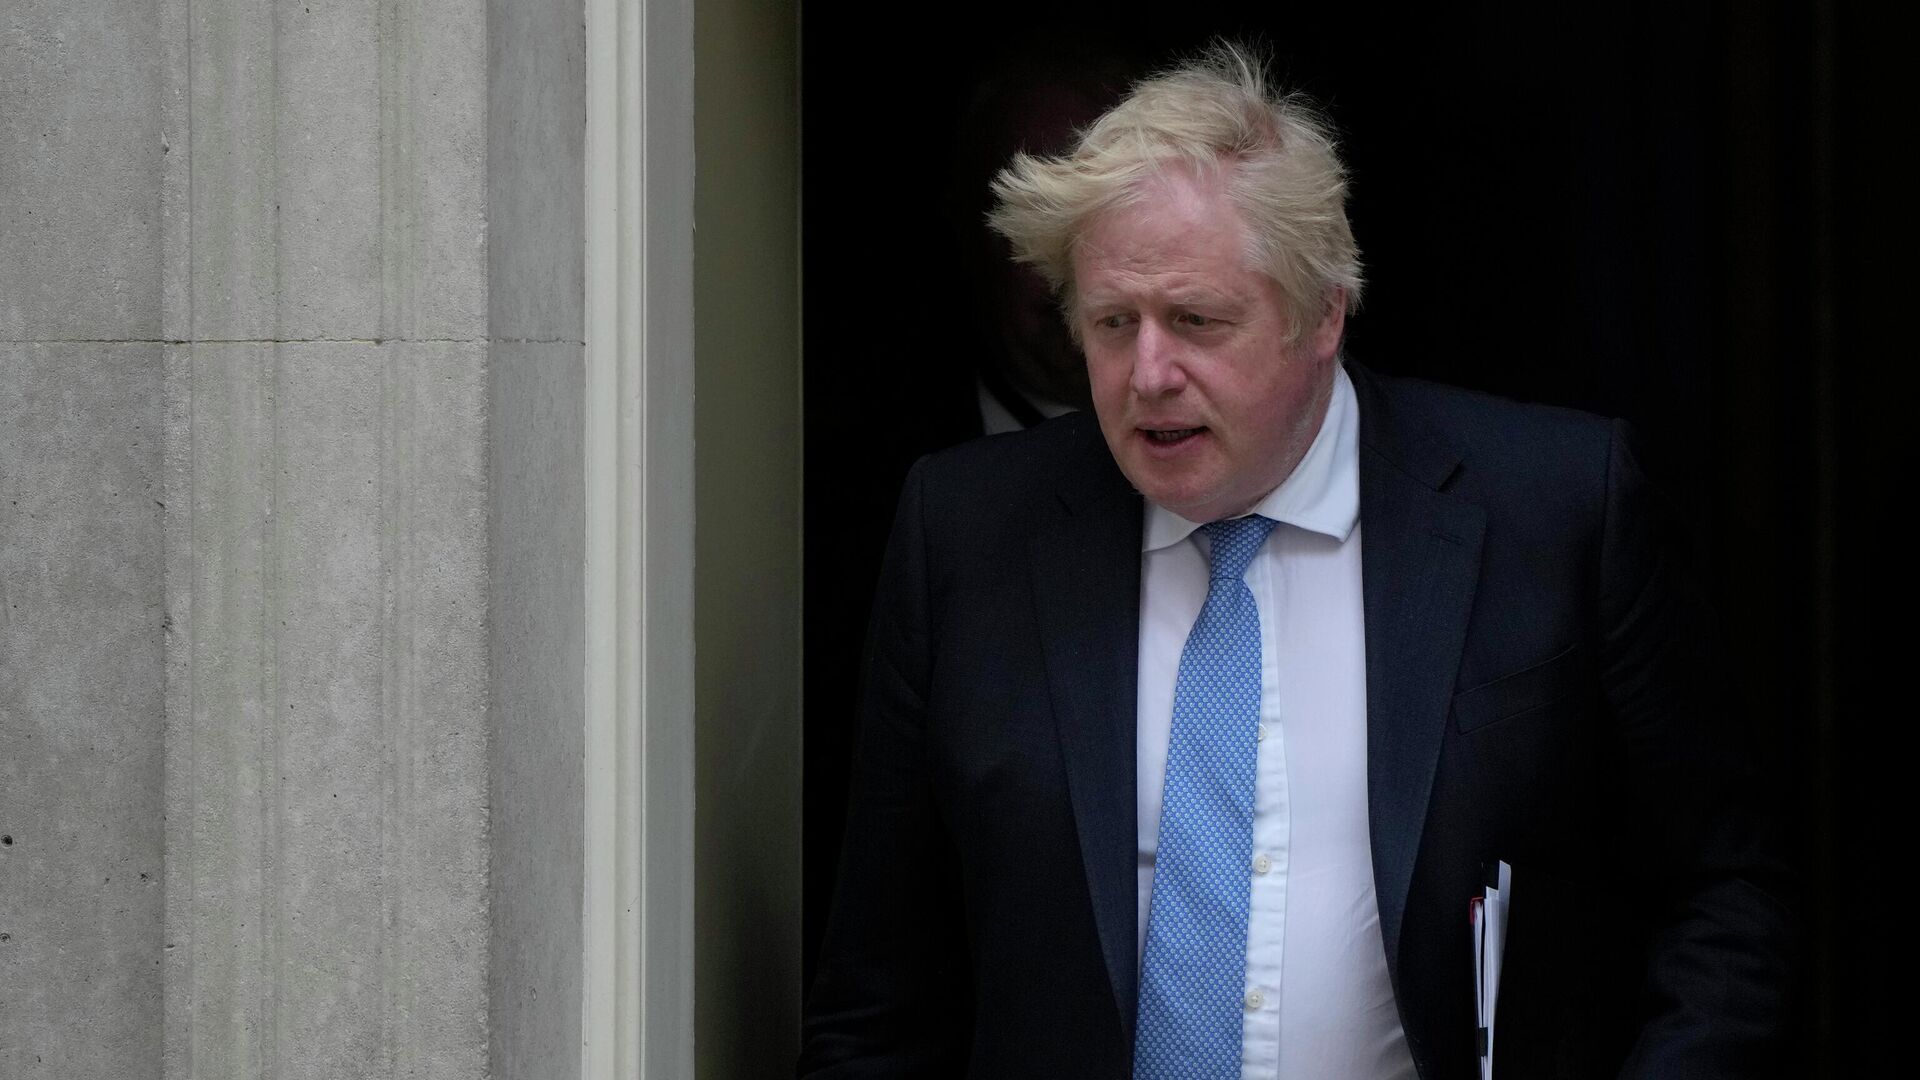 Britain's Prime Minister Boris Johnson leaves 10 Downing Street for the House of Commons to make a statement about Downing Street parties during the coronavirus lockdowns in London, Tuesday, April 19, 2022 - Sputnik International, 1920, 26.05.2022